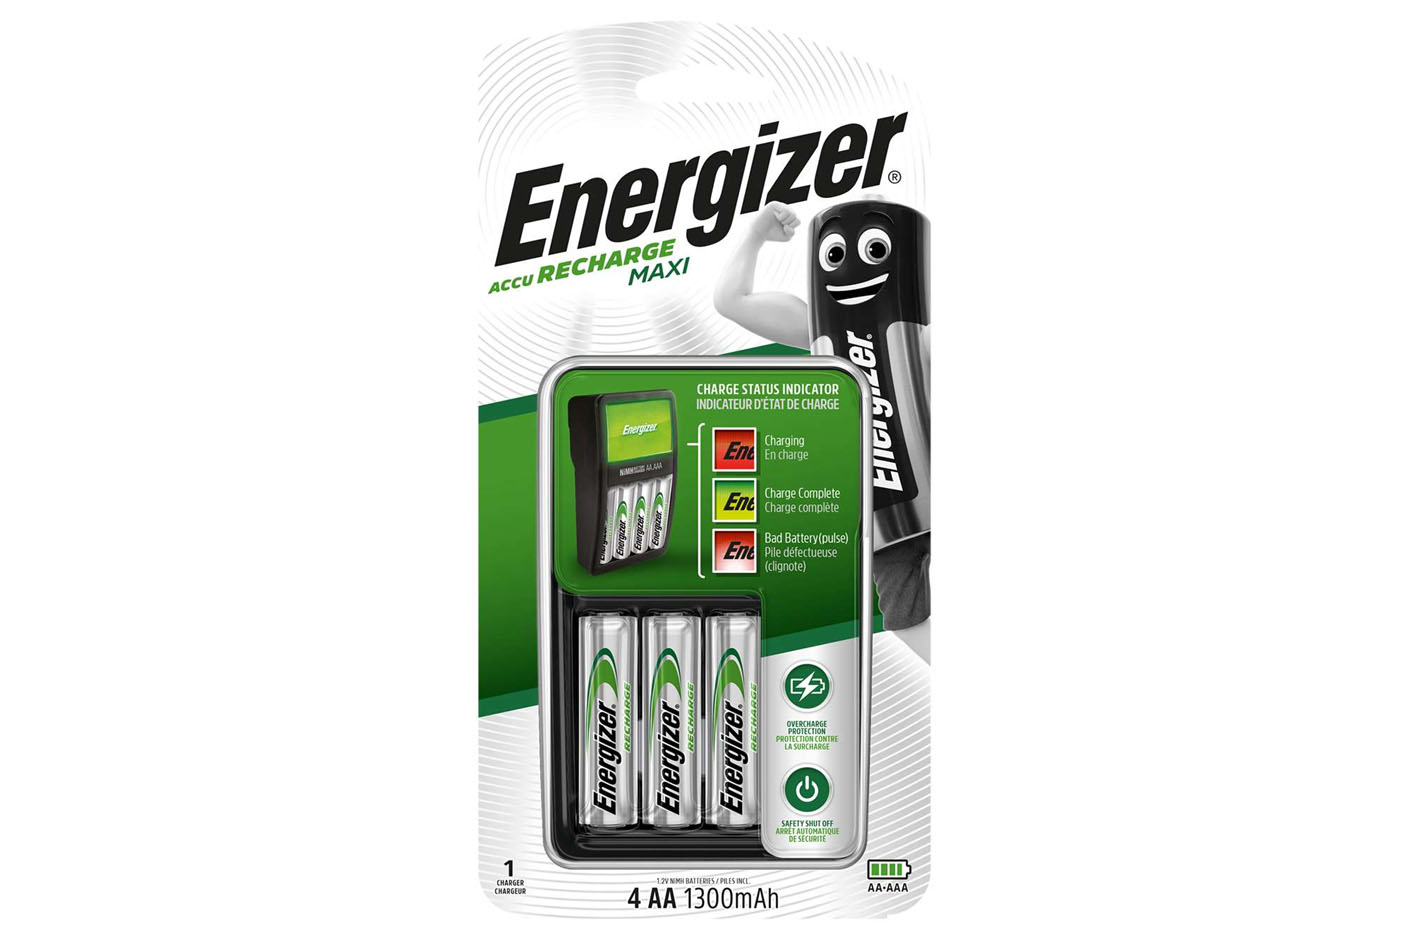 E300810100 ENERGIZER Maxi Charger with 4x 1300mAh Rechargeable AA Batteries